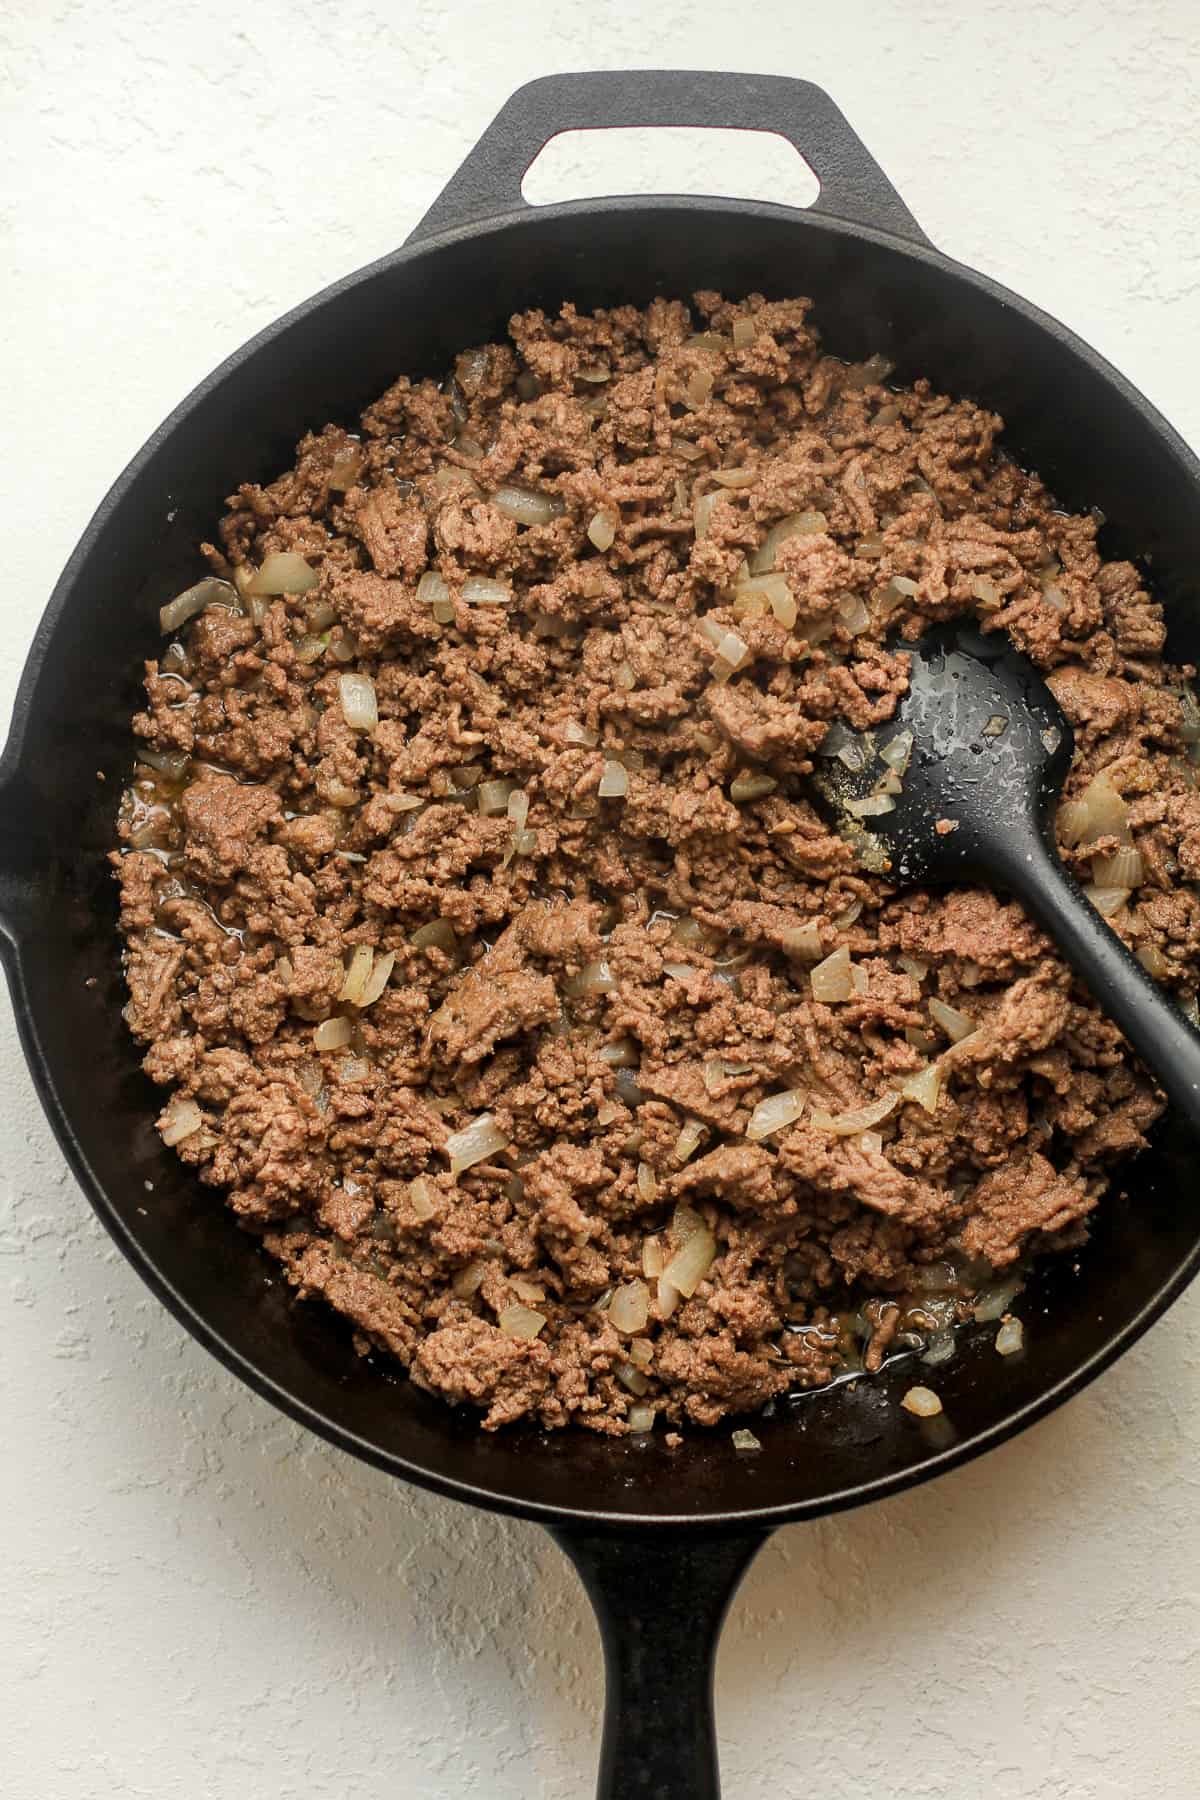 A skillet of the browned beef mixture.